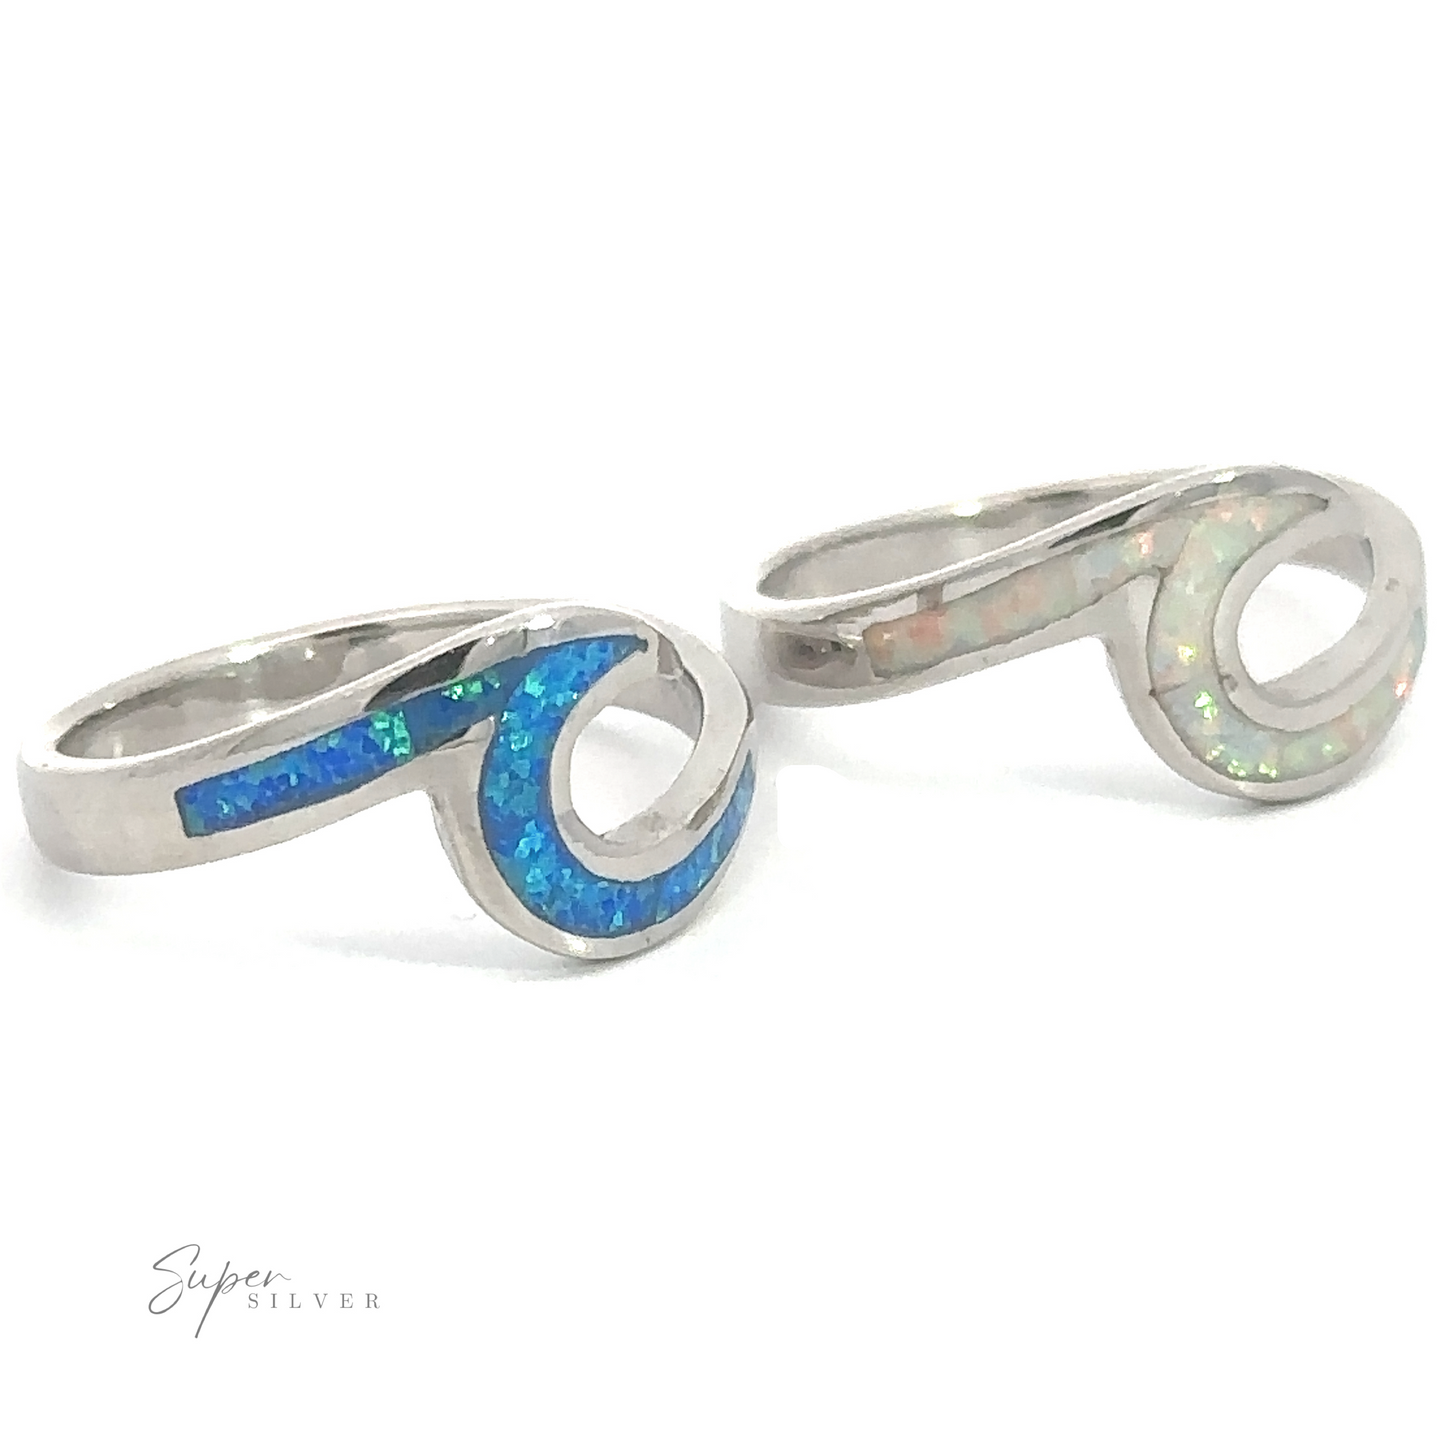 Two silver Wave Rings with ocean blue and opals inlay on a white background.
Product Name: Two Wave Rings with Sparkling Inlaid Lab-Opals